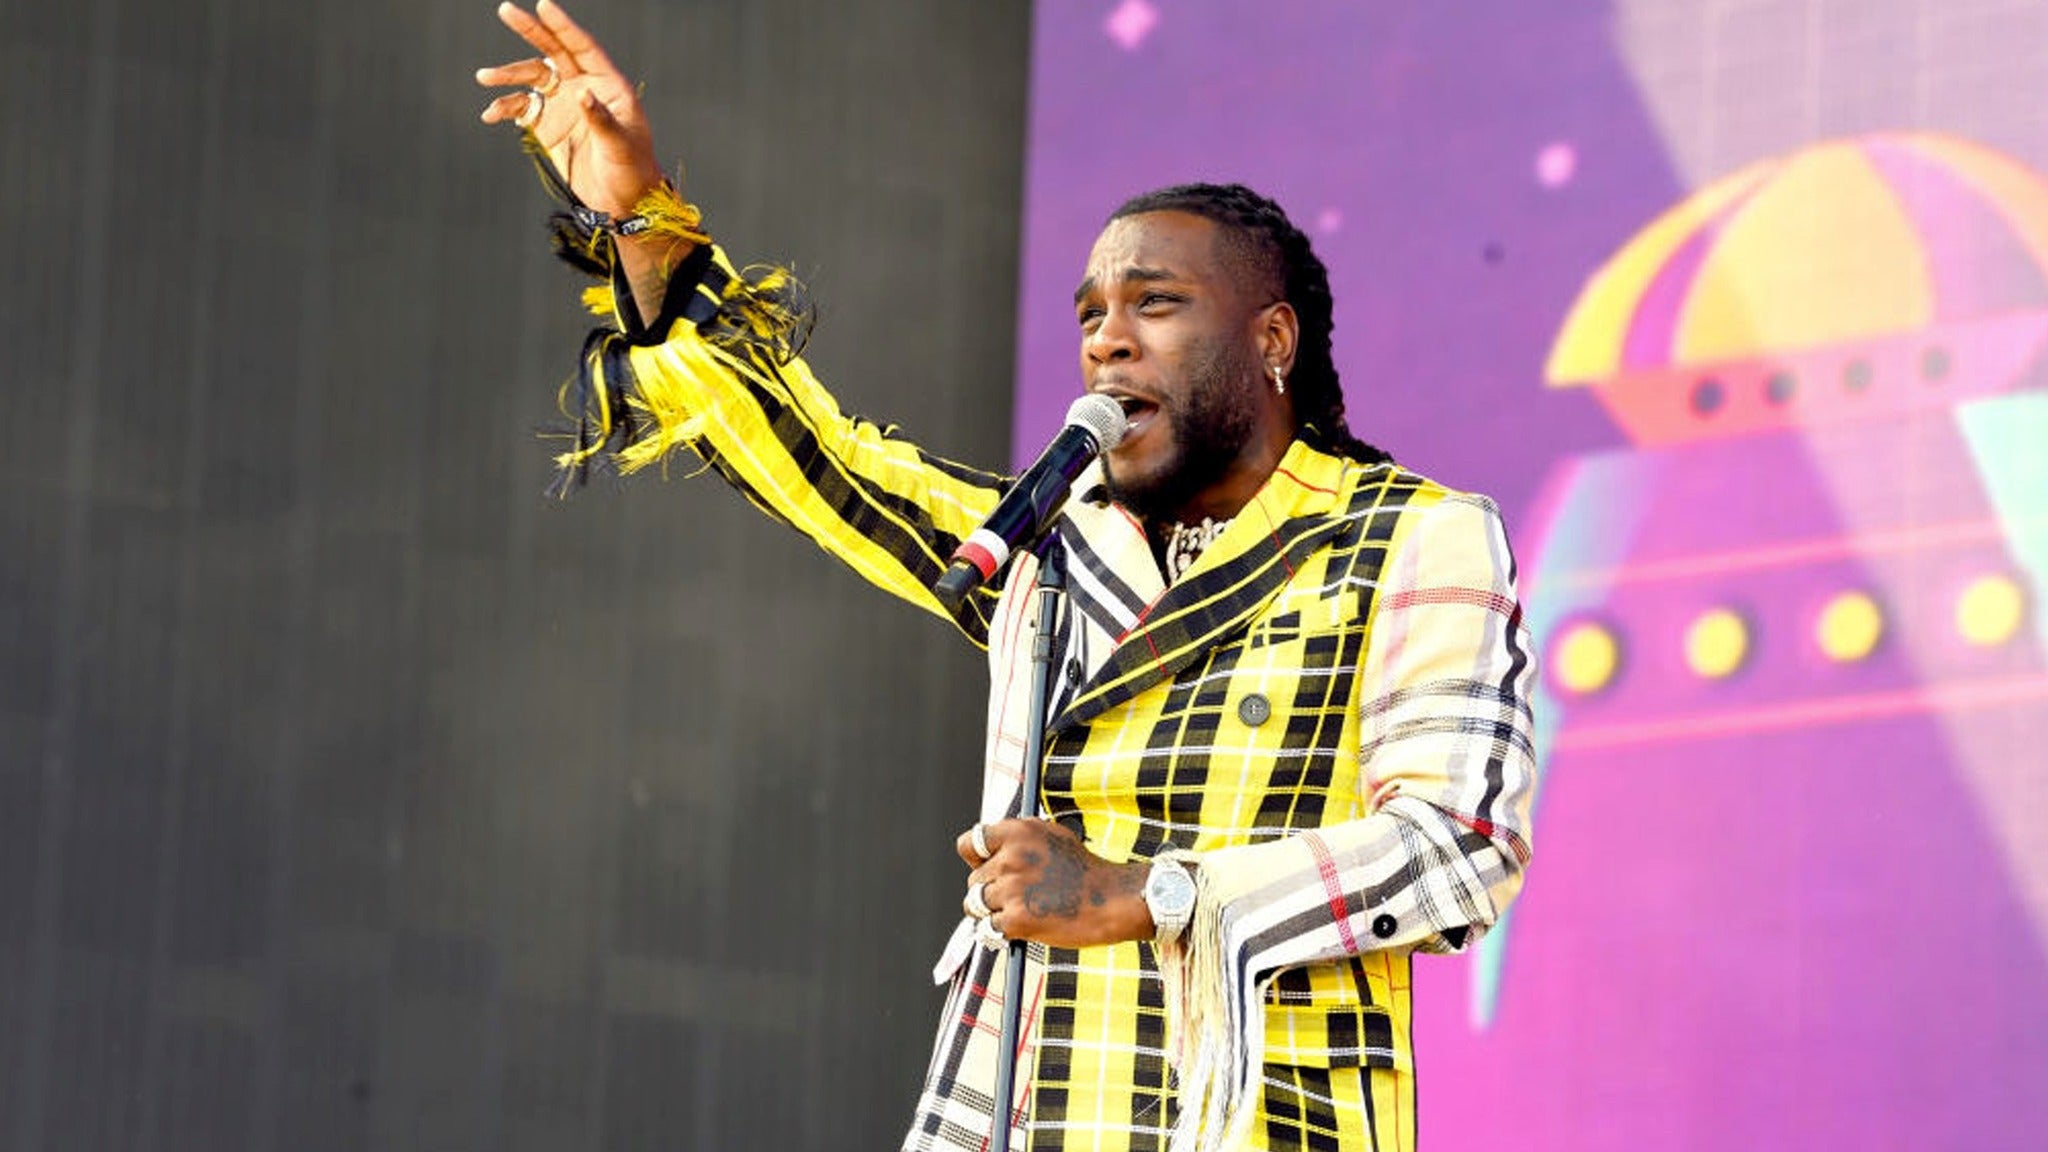 Burna Boy - Twice As Tall Tour in Minneapolis promo photo for Live Nation presale offer code